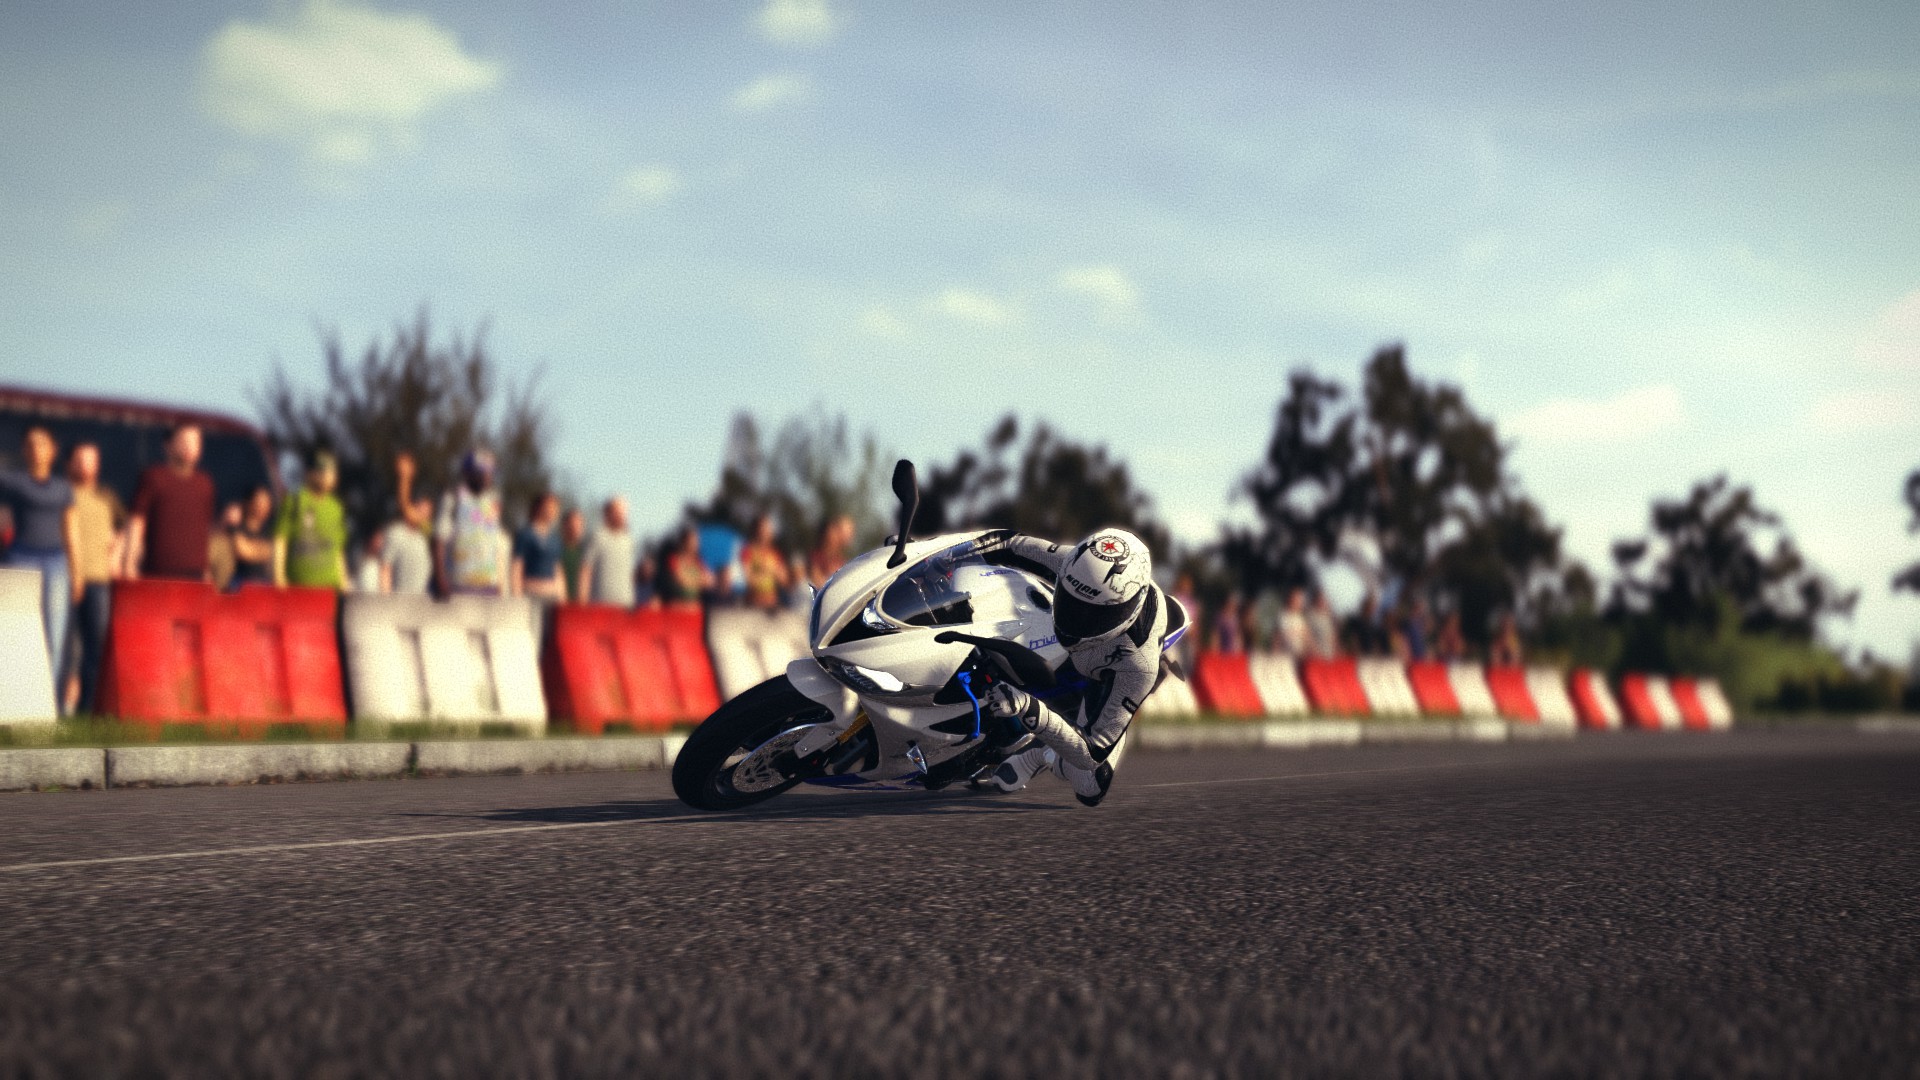 Motorcycle Motorcycle Racing Triumph 1920x1080